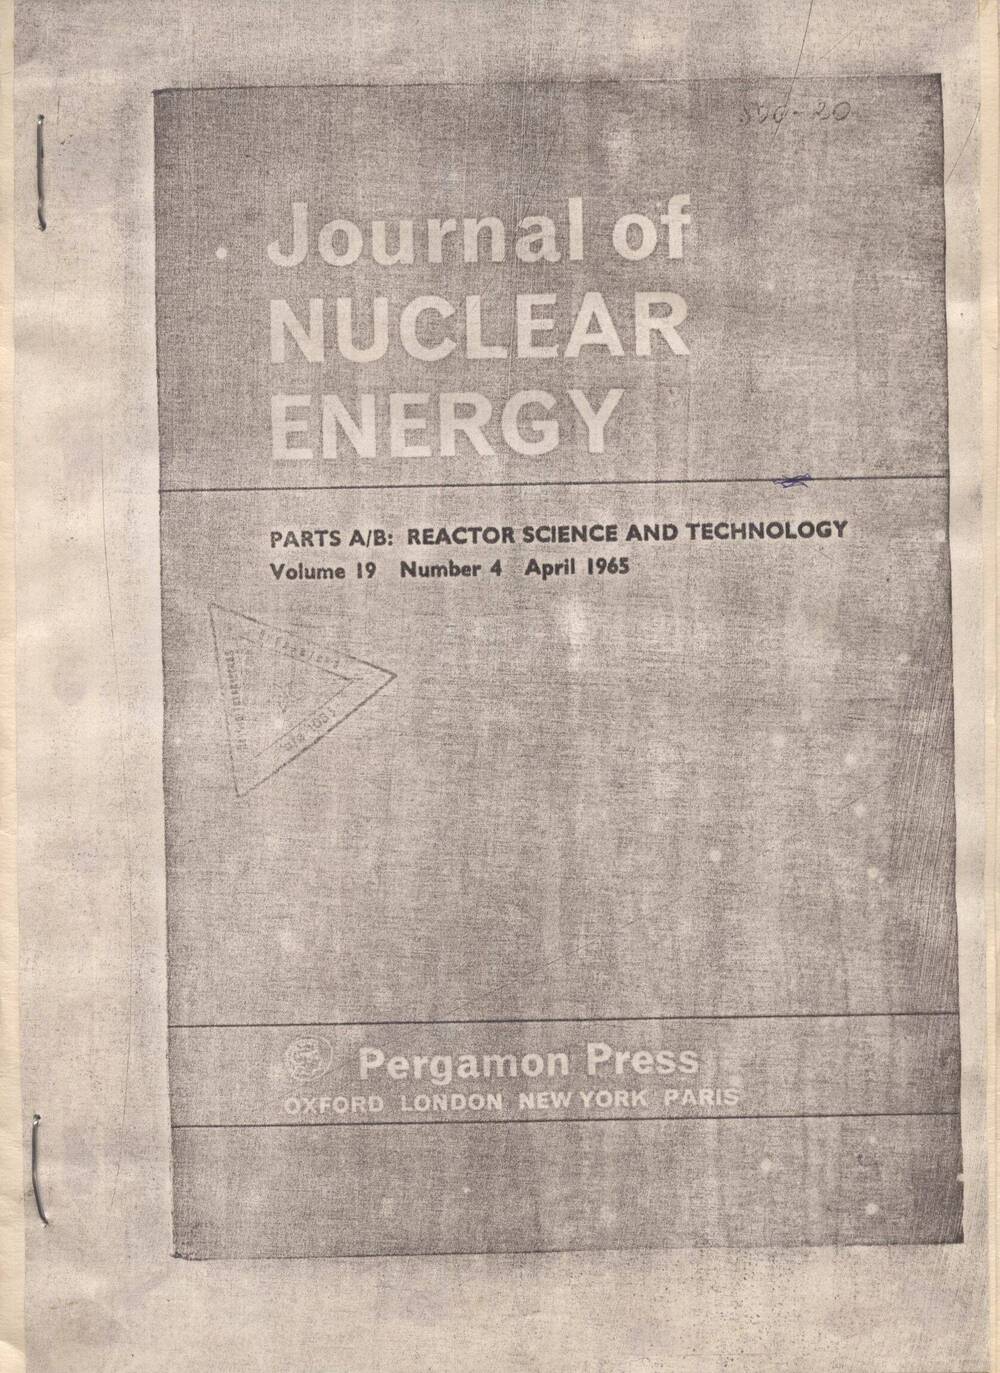 Статья научная на английском языке. JournaI of NUCLEAR ENERGY PARTS A/B: REACTOR SCIENCE AND TECHNOLOGY VoIume 19 Number 4 ApriI 1965. (Копия).